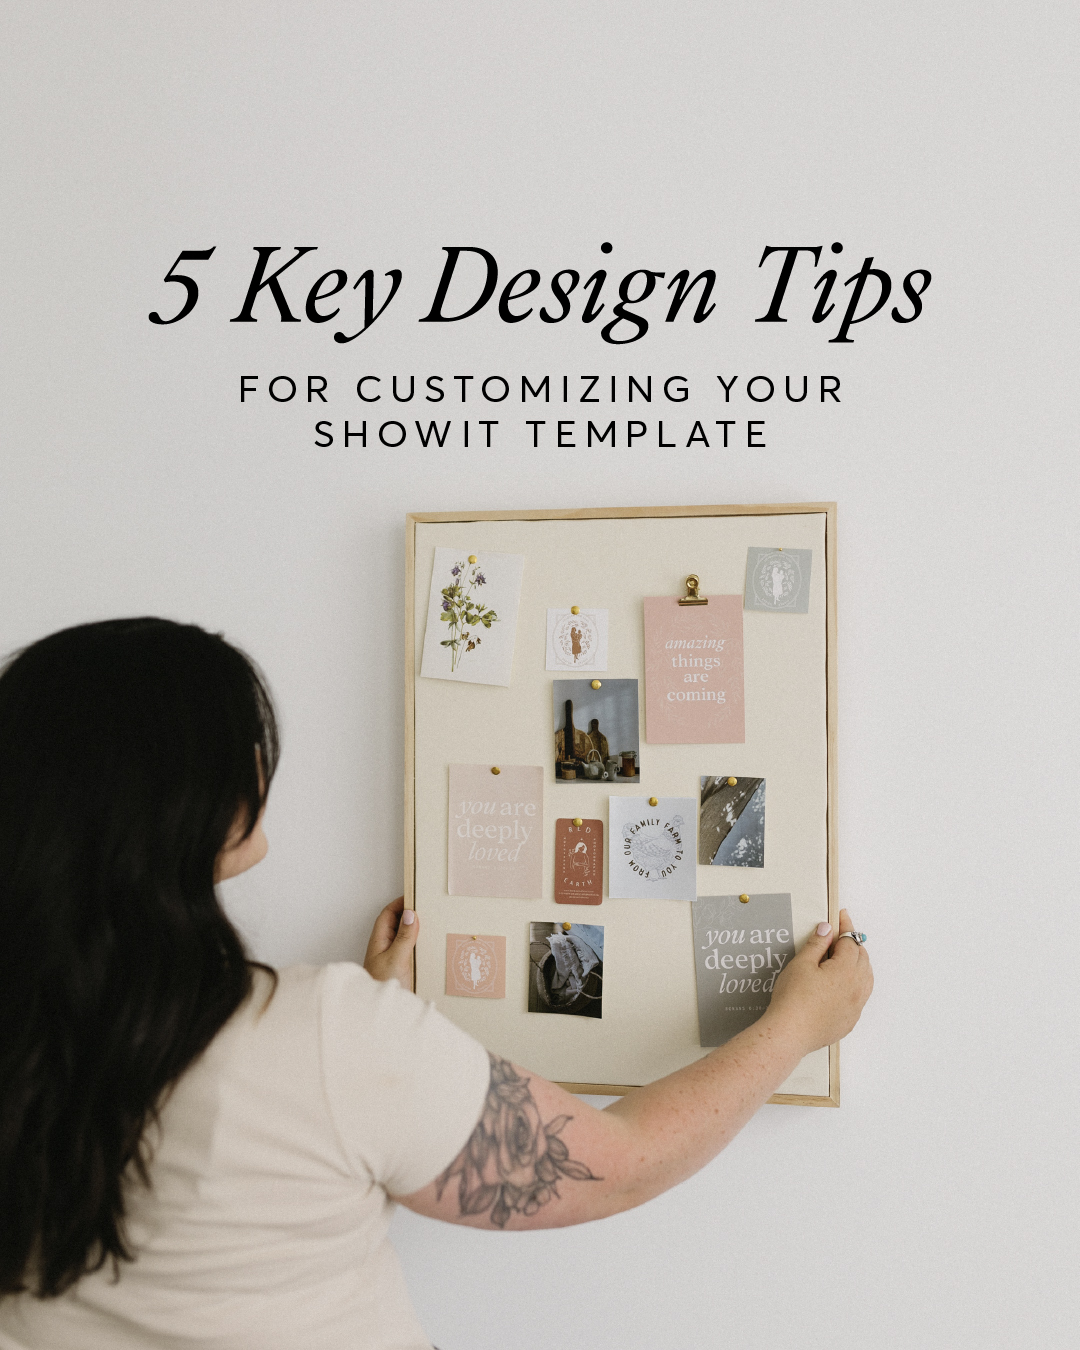 5 Design Tips for Customizing Your Showit Template